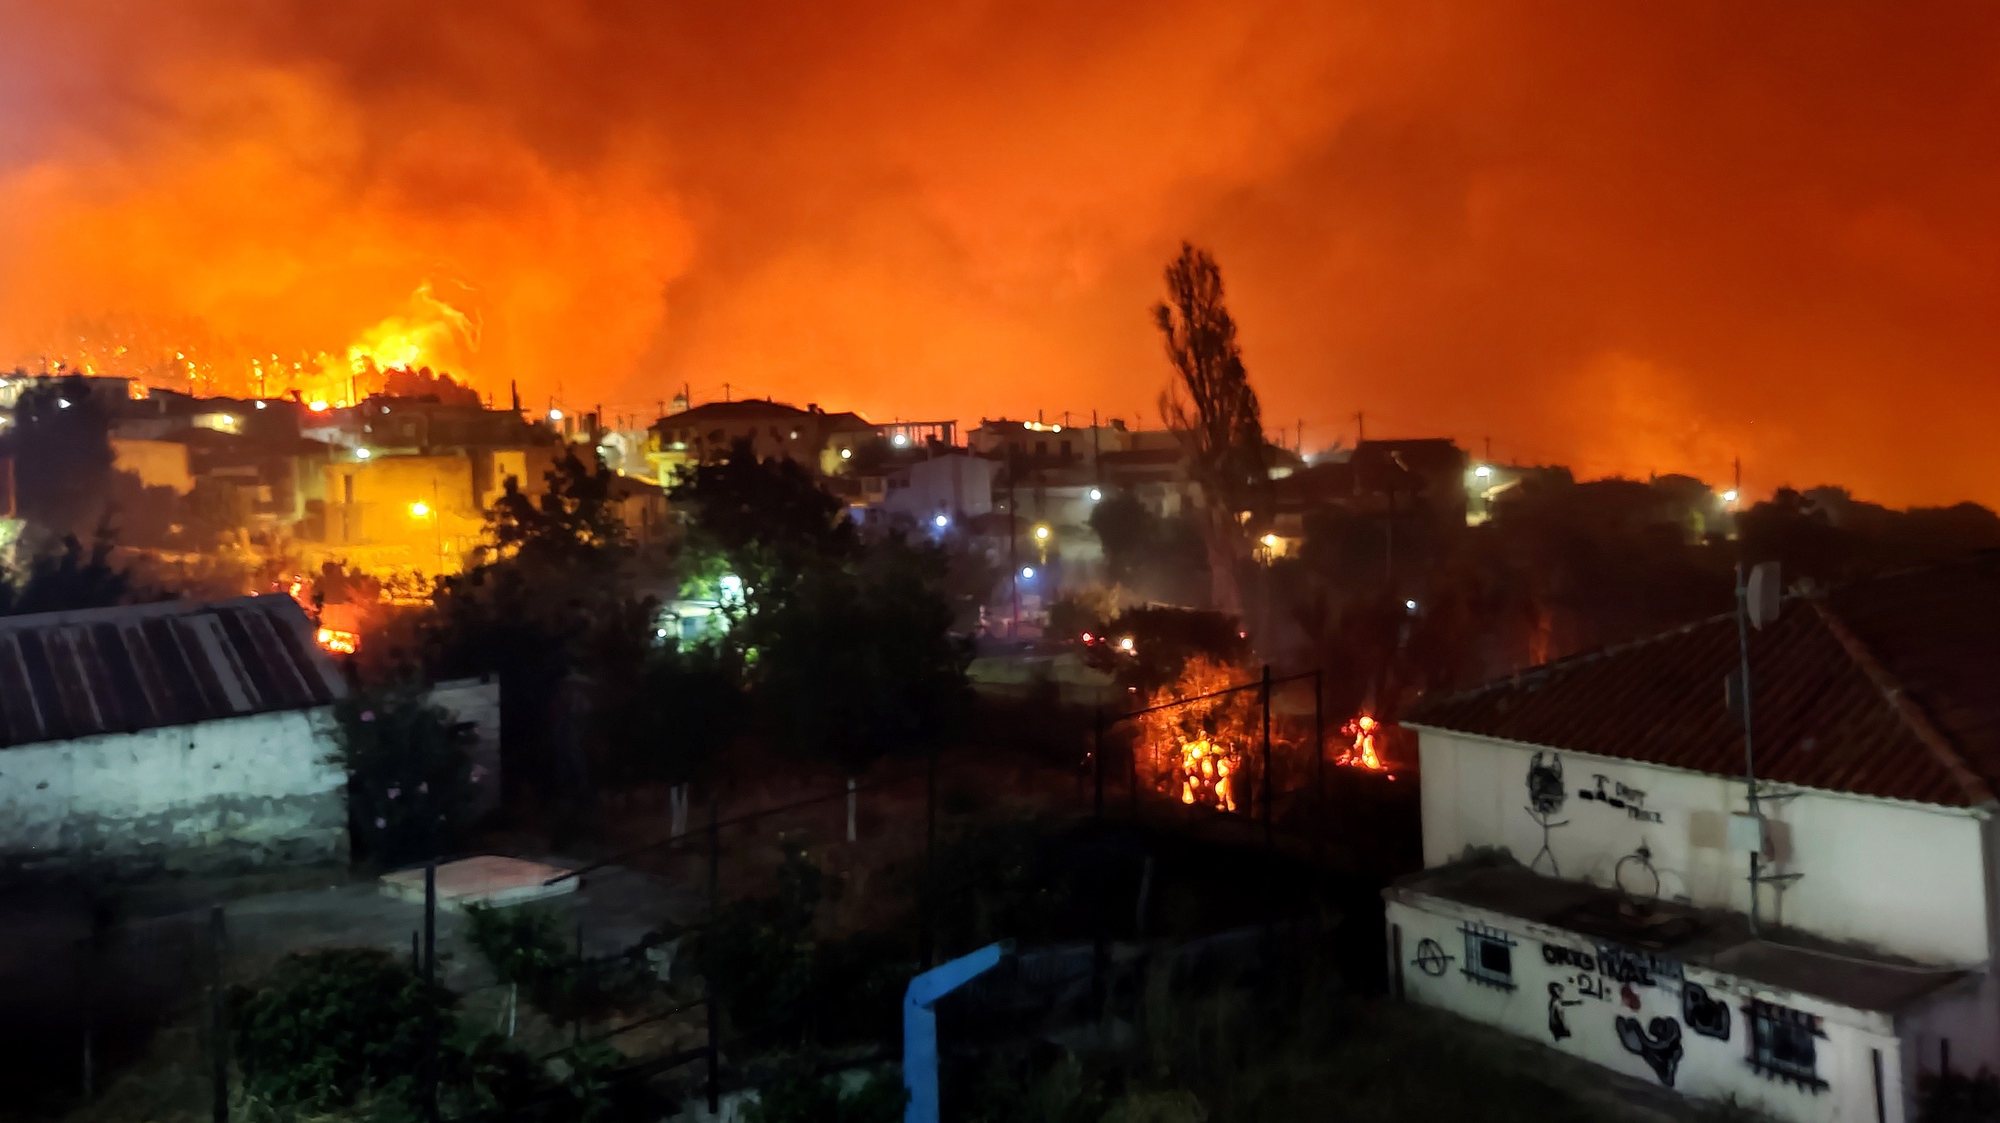 epa09399808 Smoke and flames rise as a wildfire burns the area of Skepasti in Evia island, eastern coast of Central Greece, 05 August 2021 (issued 06 August 2021).The battle with the flames continued for a third consecutive day in north Evia, where various fronts had joined to form three massive fire fronts moving in different directions and moving toward the sea.The region of Central Greece announced that the villages Aghia Anna, Kerasia and Ahladi in northern Evia must be evacuated due to the raging fire in the area.  EPA/PANAGIOTIS KOUROS